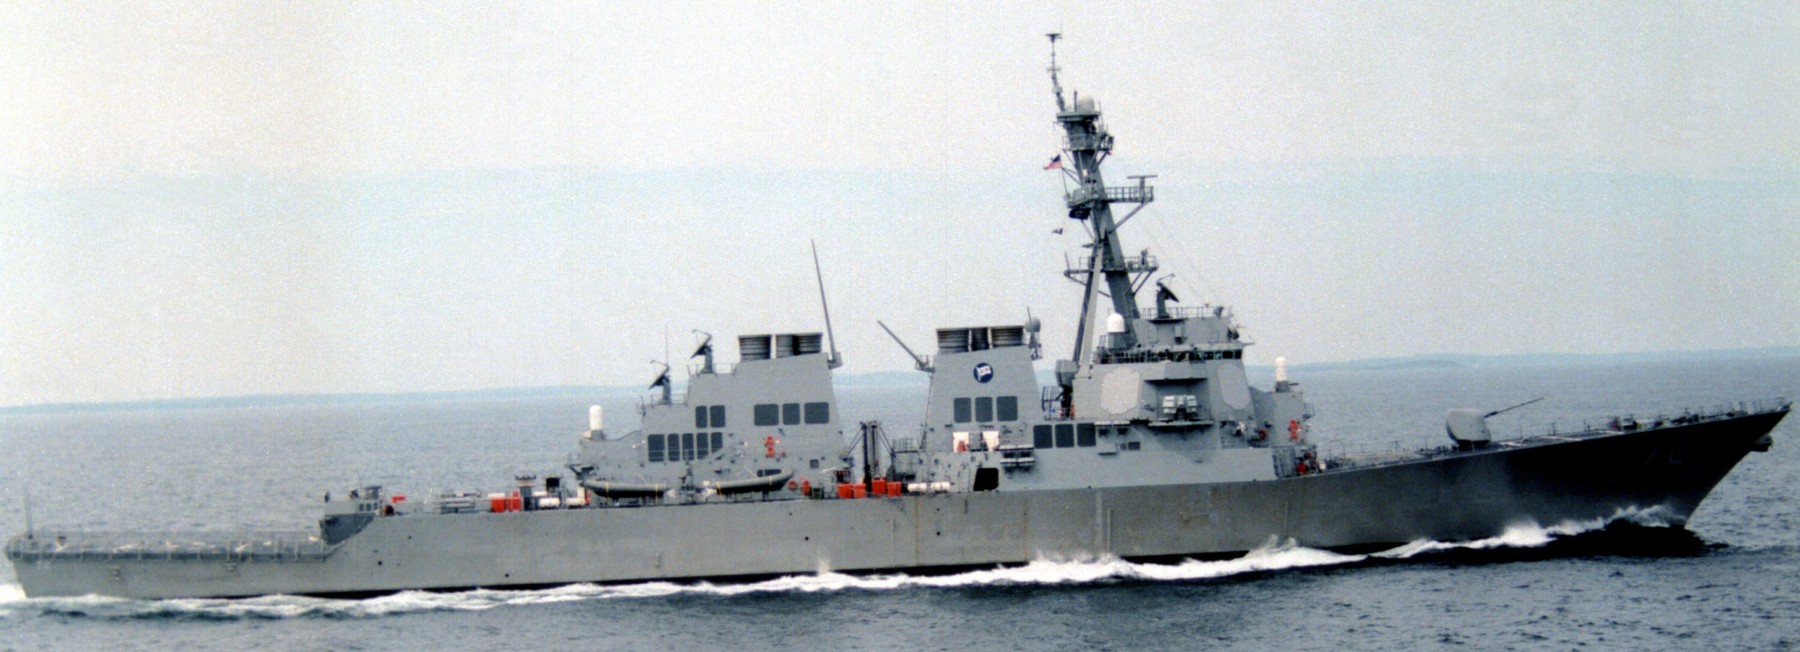 ddg-72 uss mahan guided missile destroyer arleigh burke class aegis bmd 45